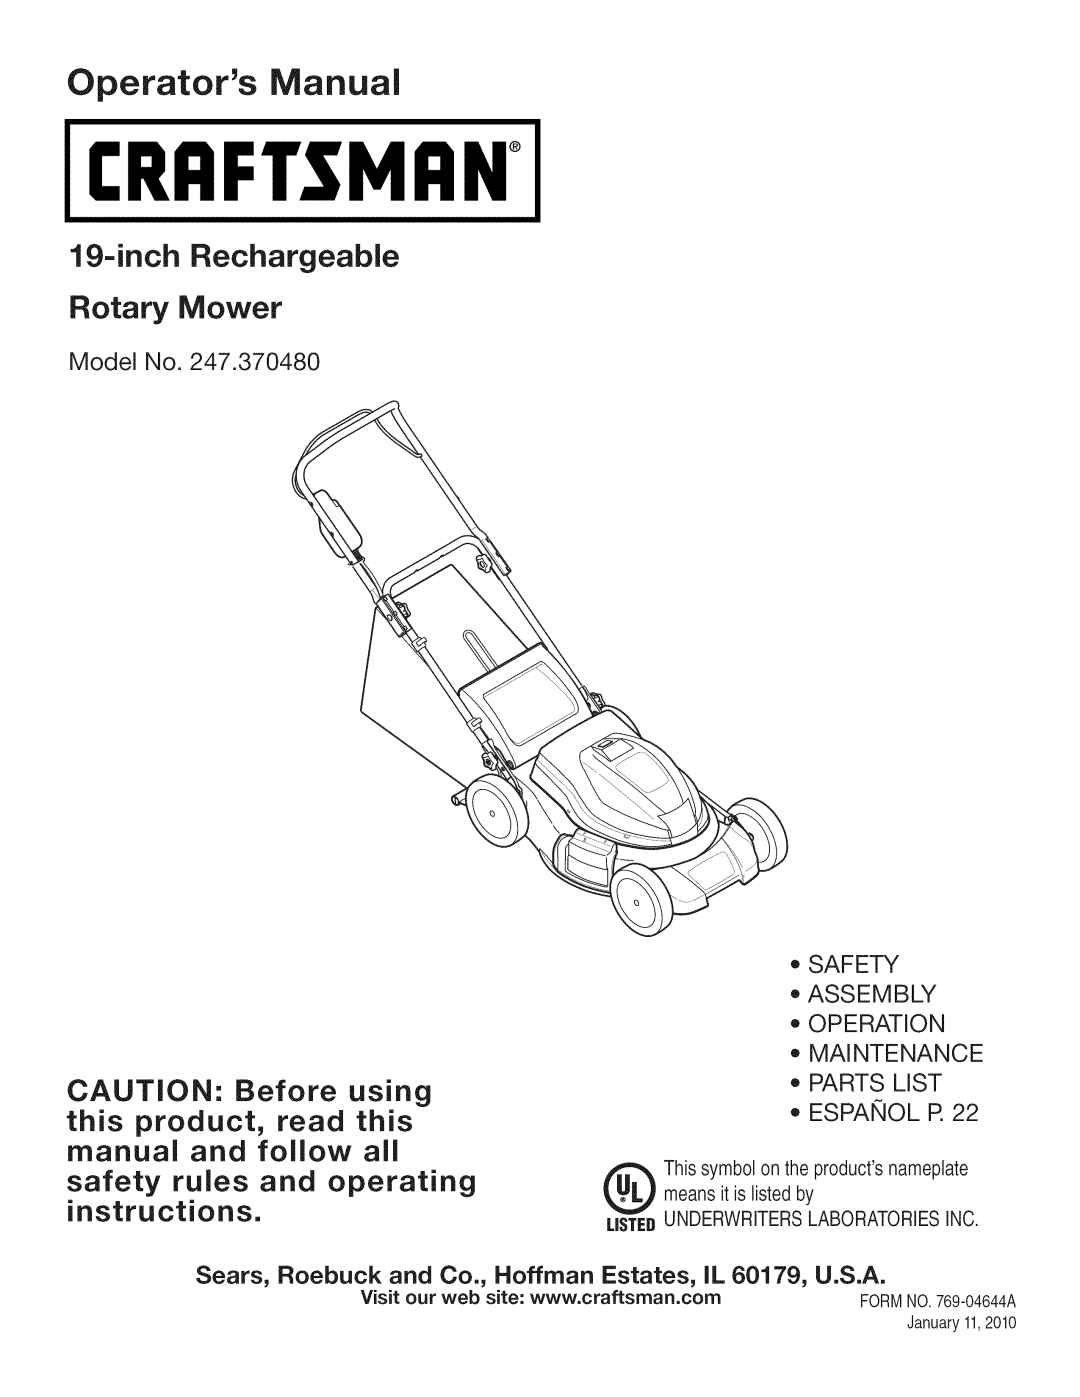 Craftsman 247.370480 manual inch Rechargeable Rotary Mower, safety rules and operating instructions, Crrfsm 